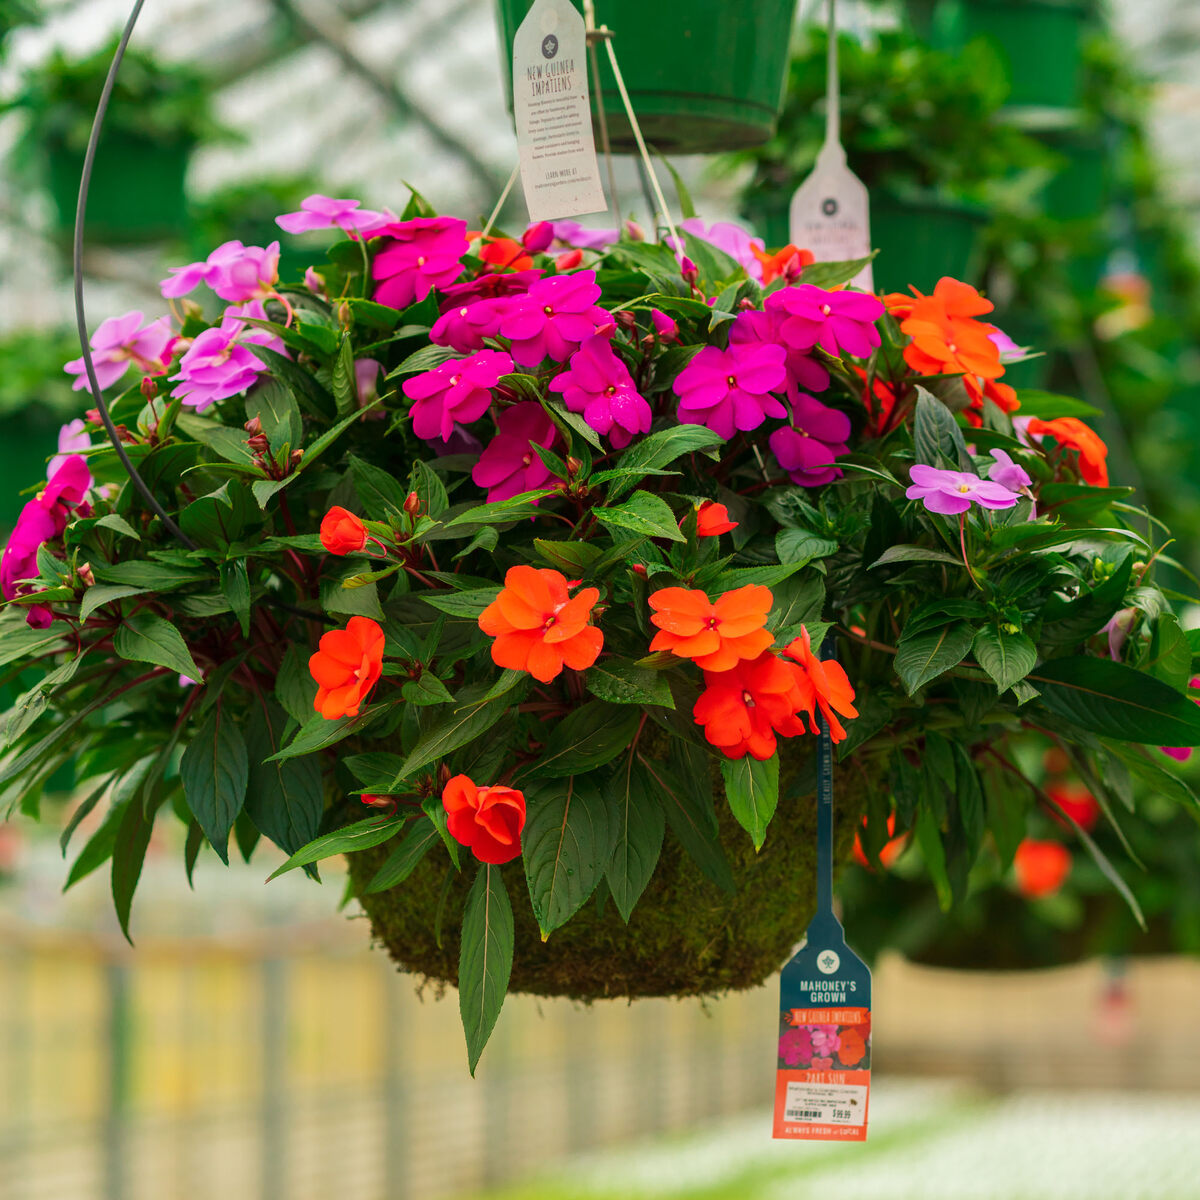 How To Care For Impatiens In Hanging Baskets